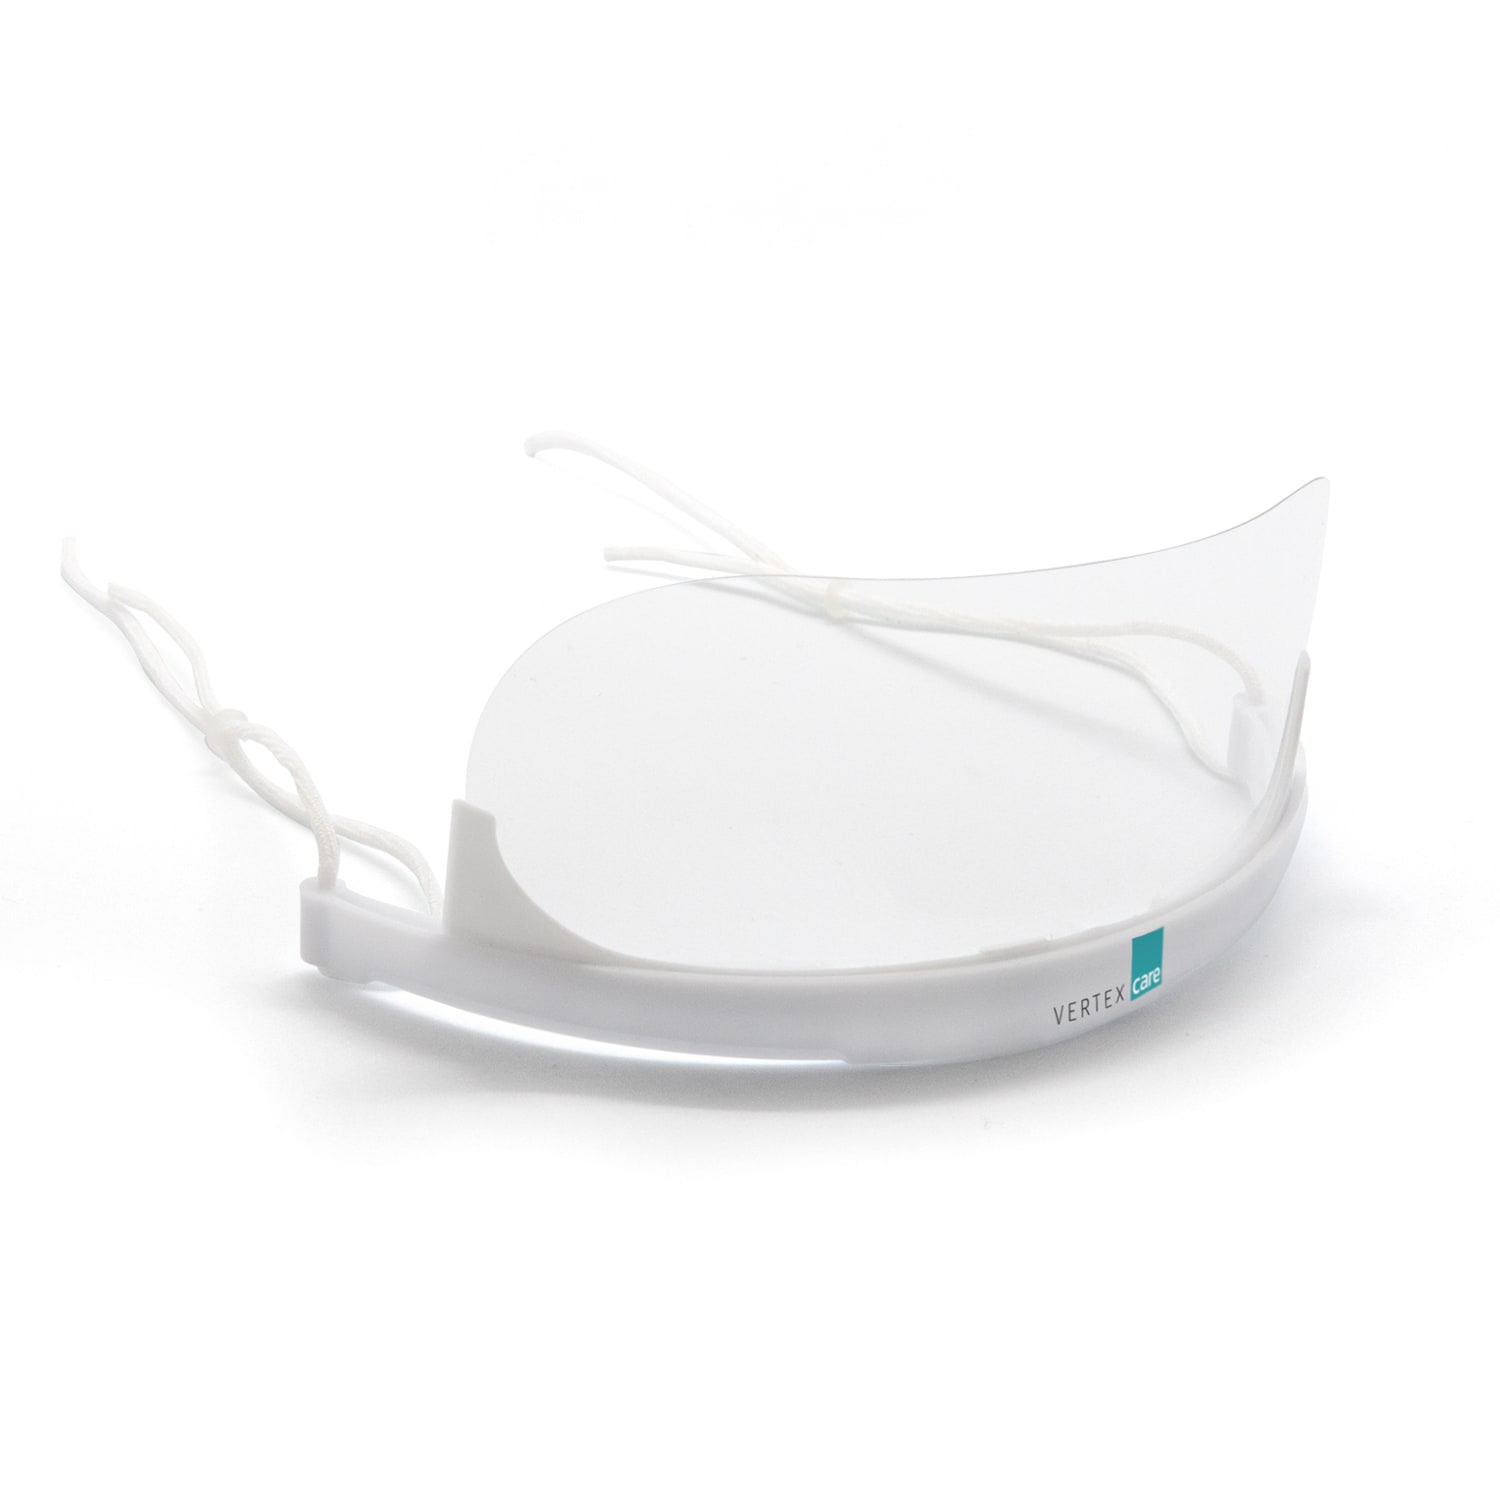 Multifunctional mouth protector with replaceable protective shield